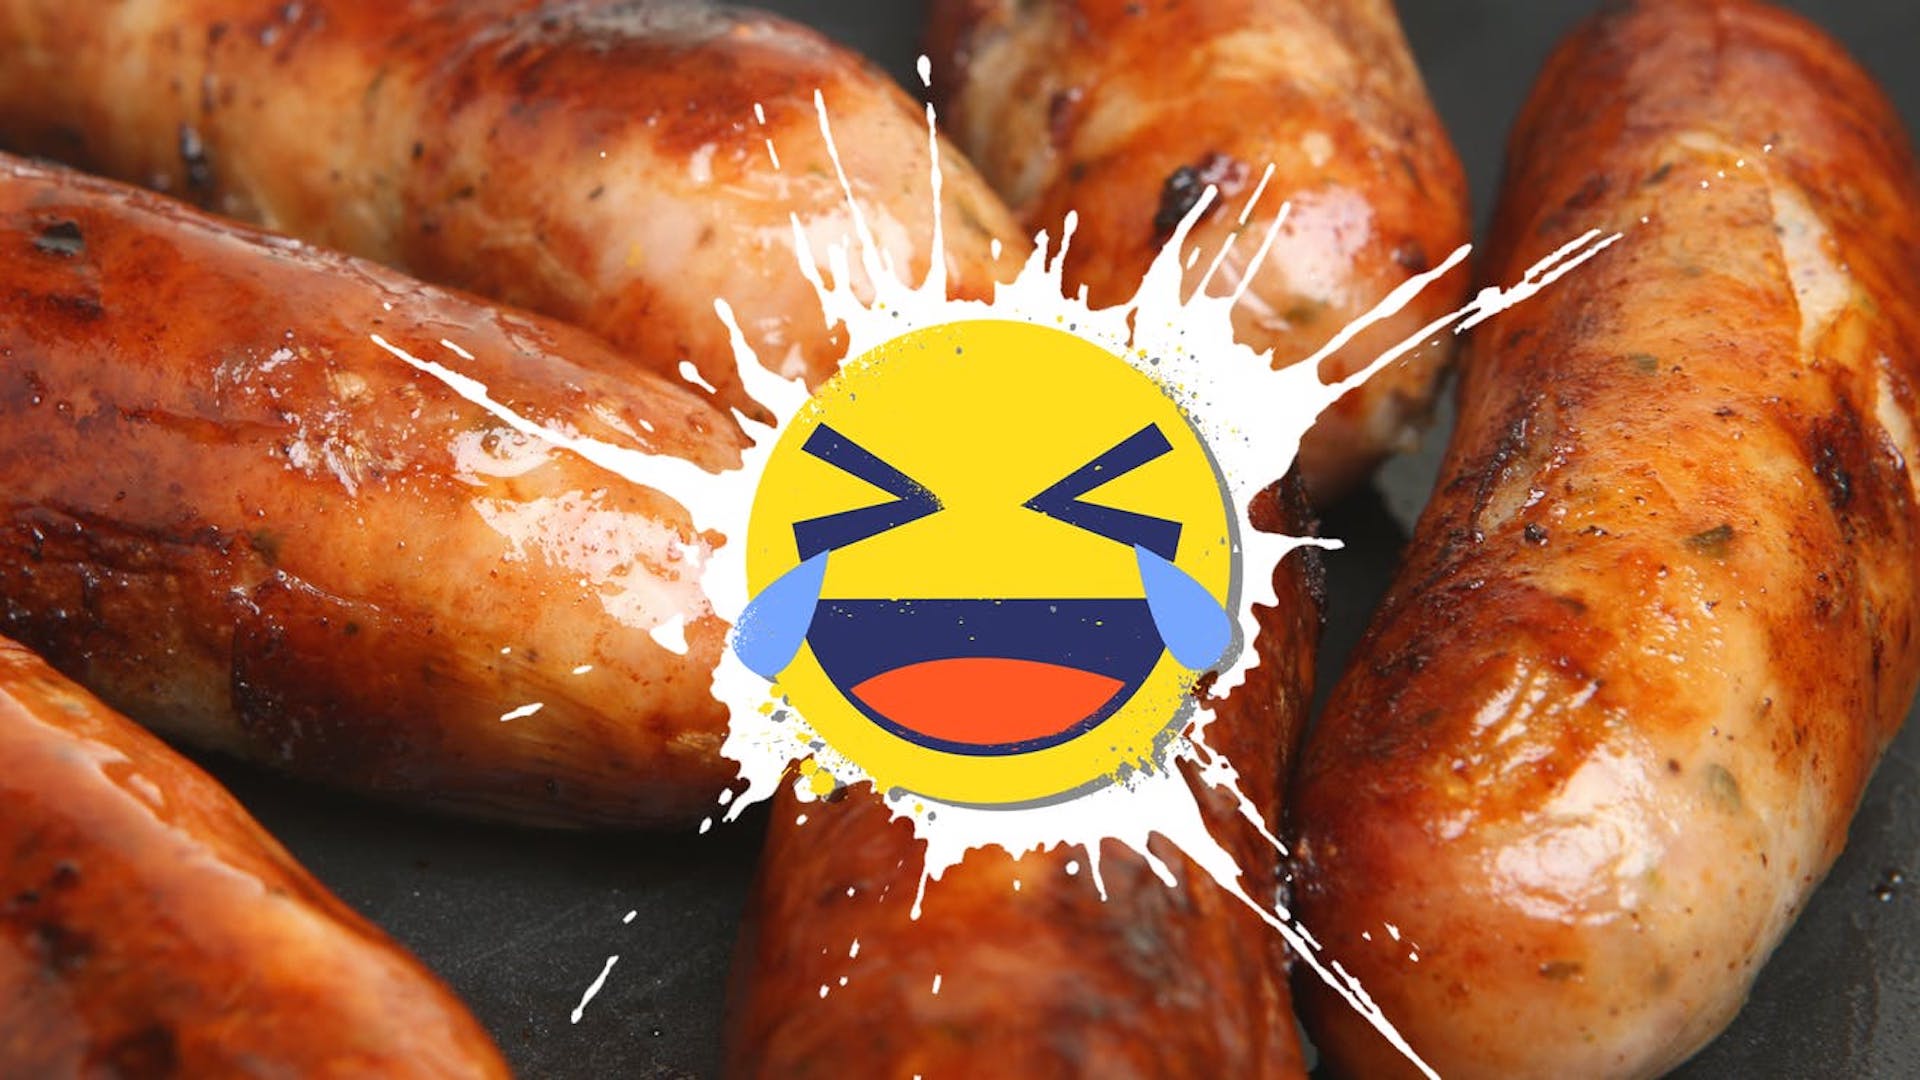 Laughing emoji over a line of sizzling sausages